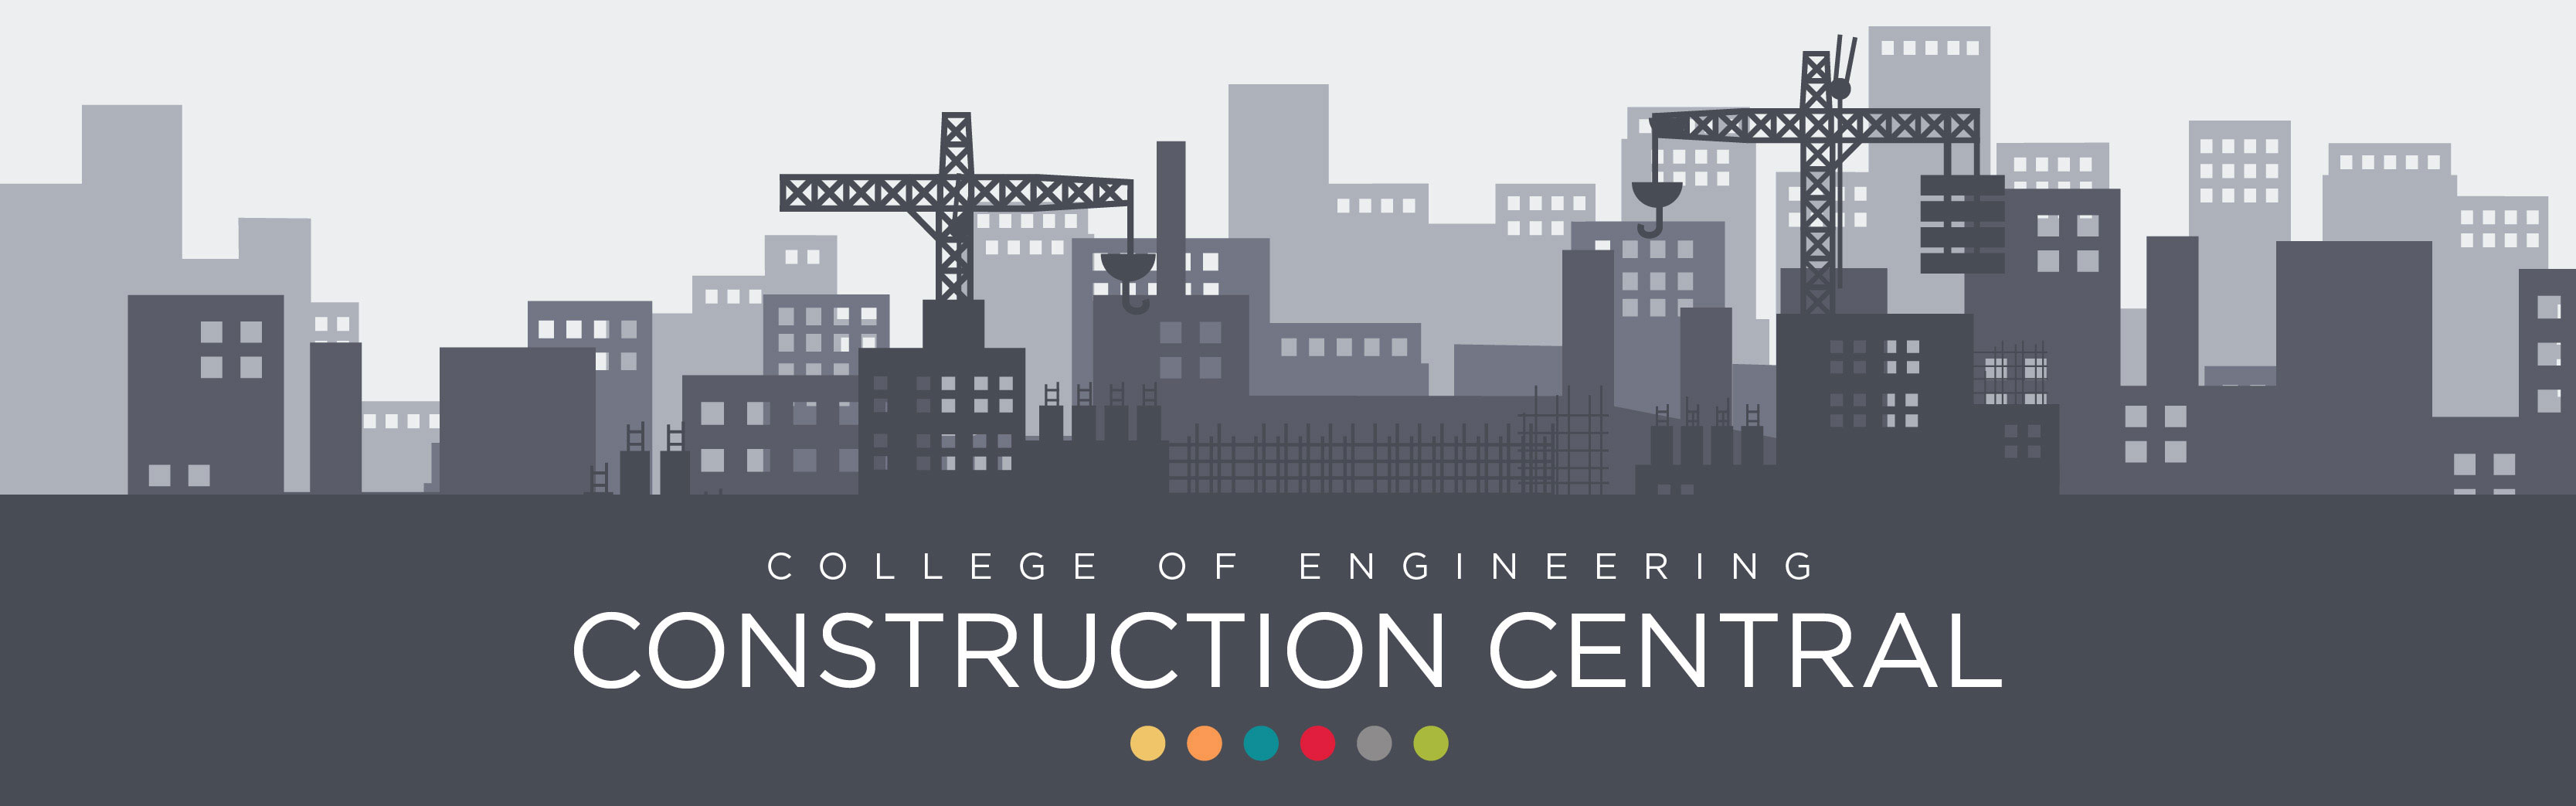 Construction Central is home to updates on the College of Engineering's building project.